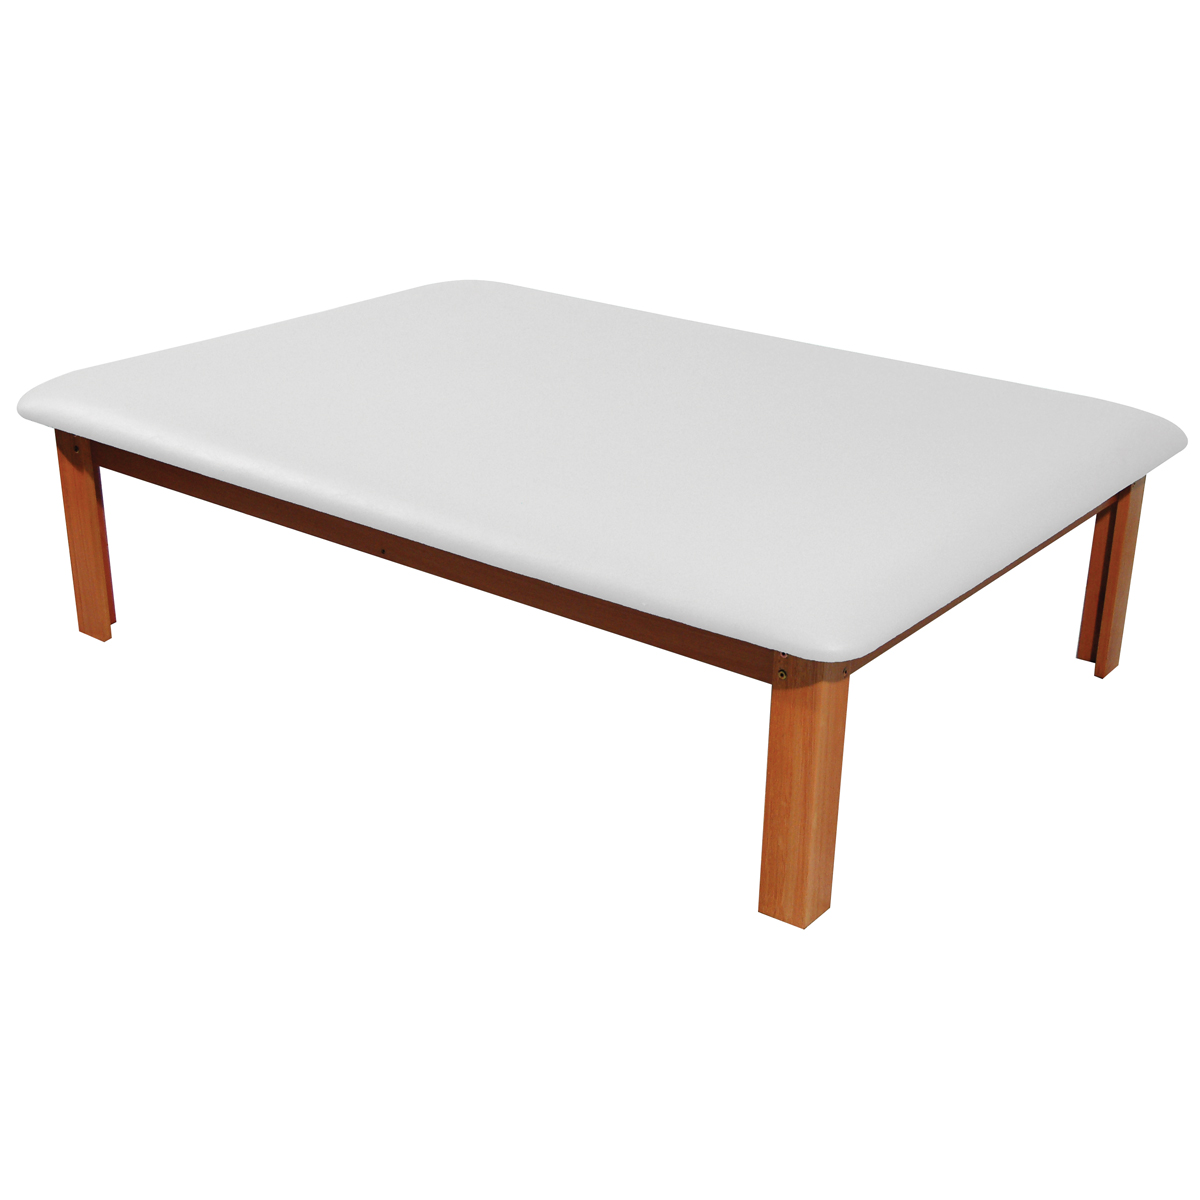 Mat Table with Padded Top by Southpaw Enterprises